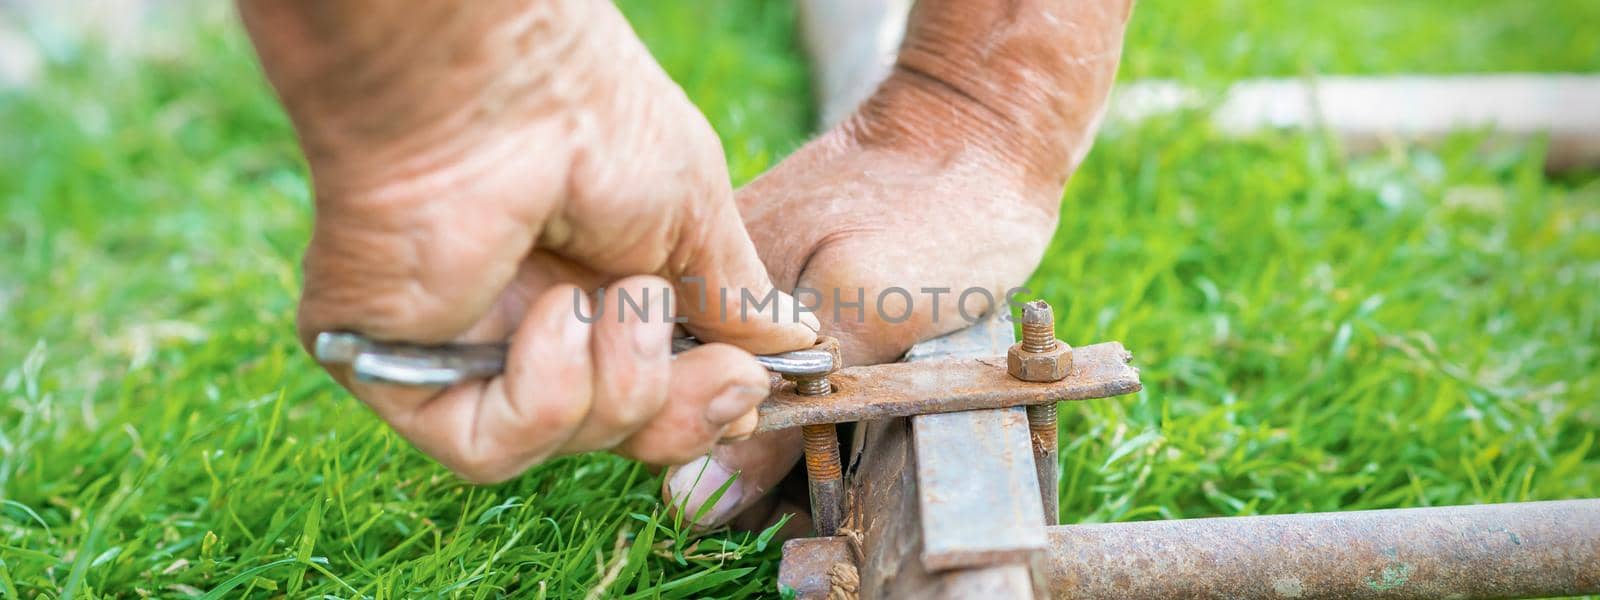 hand of an elderly man twisting the nut with a wrench outdoors. Repair by wrench.